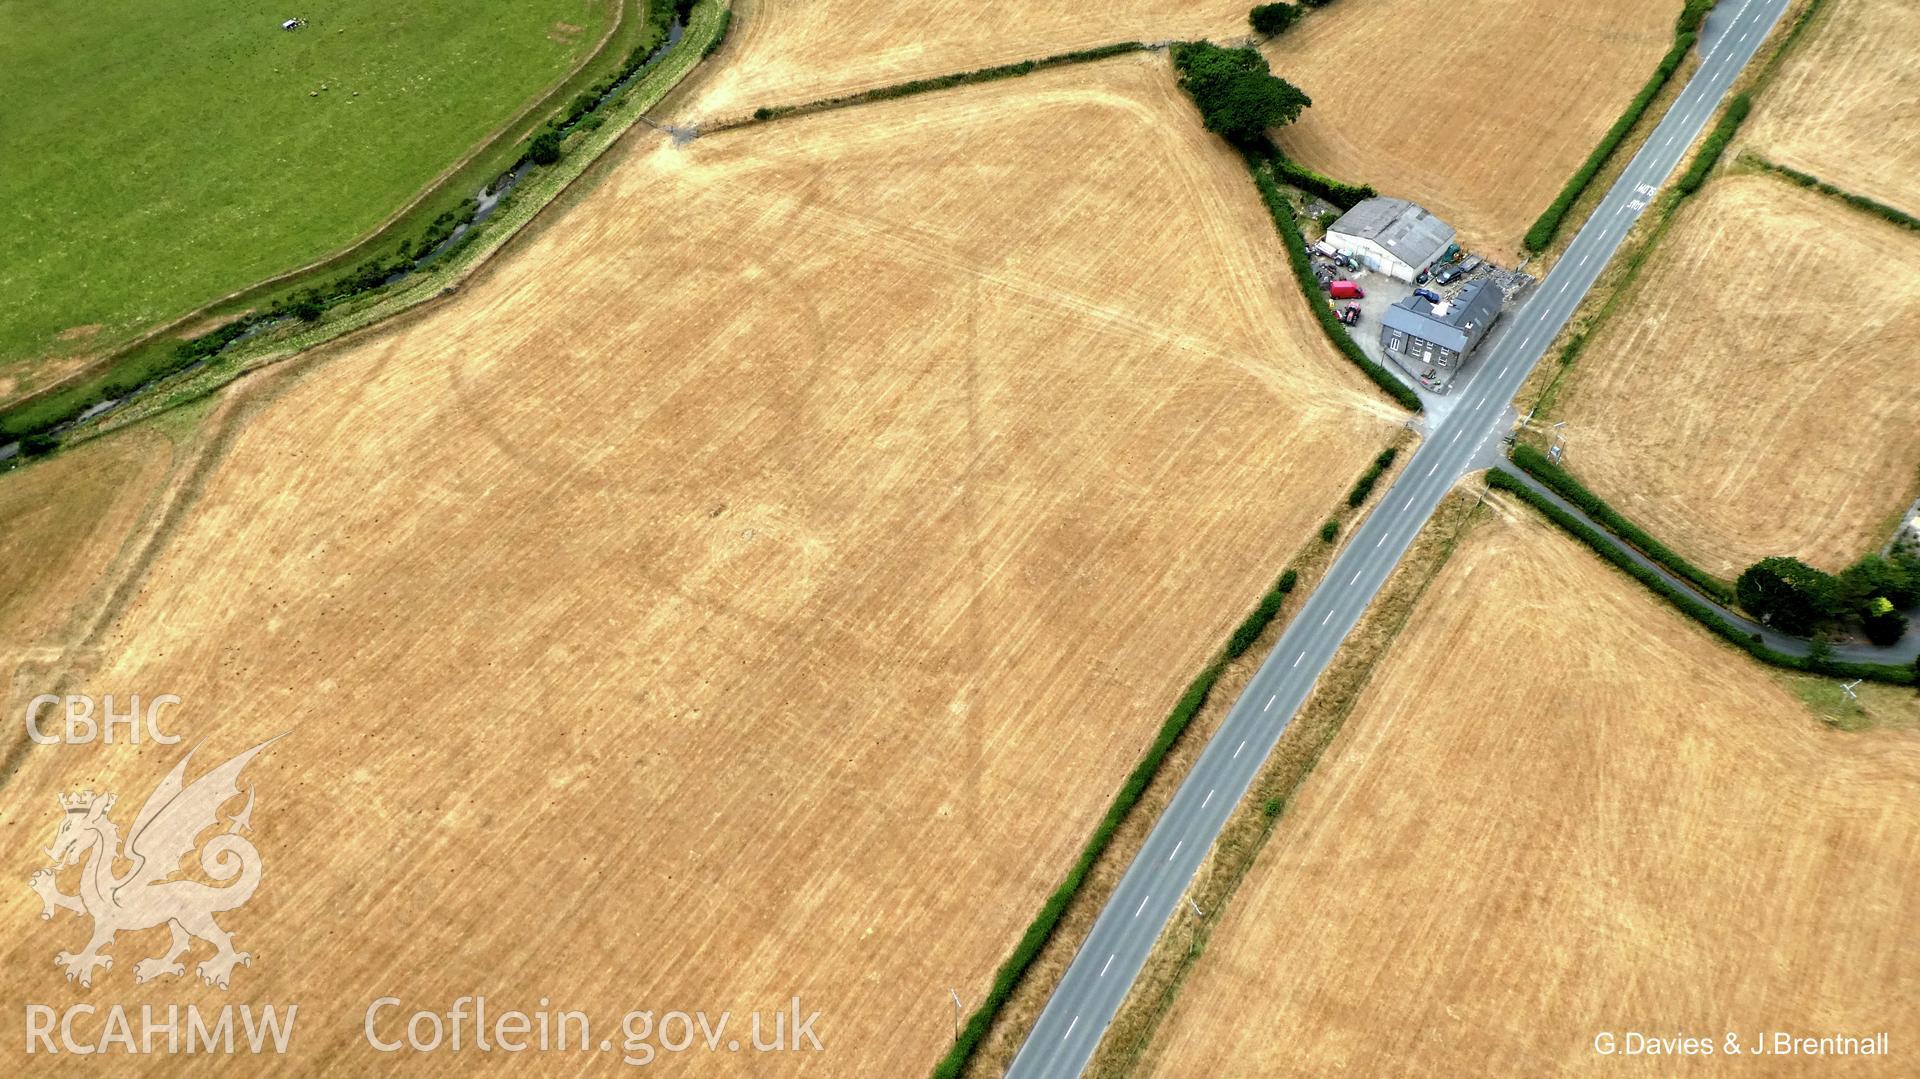 Aerial photograph of the Bryn-Crug cropmark complex, taken by Glyn Davies & Jonathan Brentnall under drought conditions, 15/07/2018. This photograph has been modified to enhance the visibility of the archaeology. Original photograph: BDC_01_01_04.